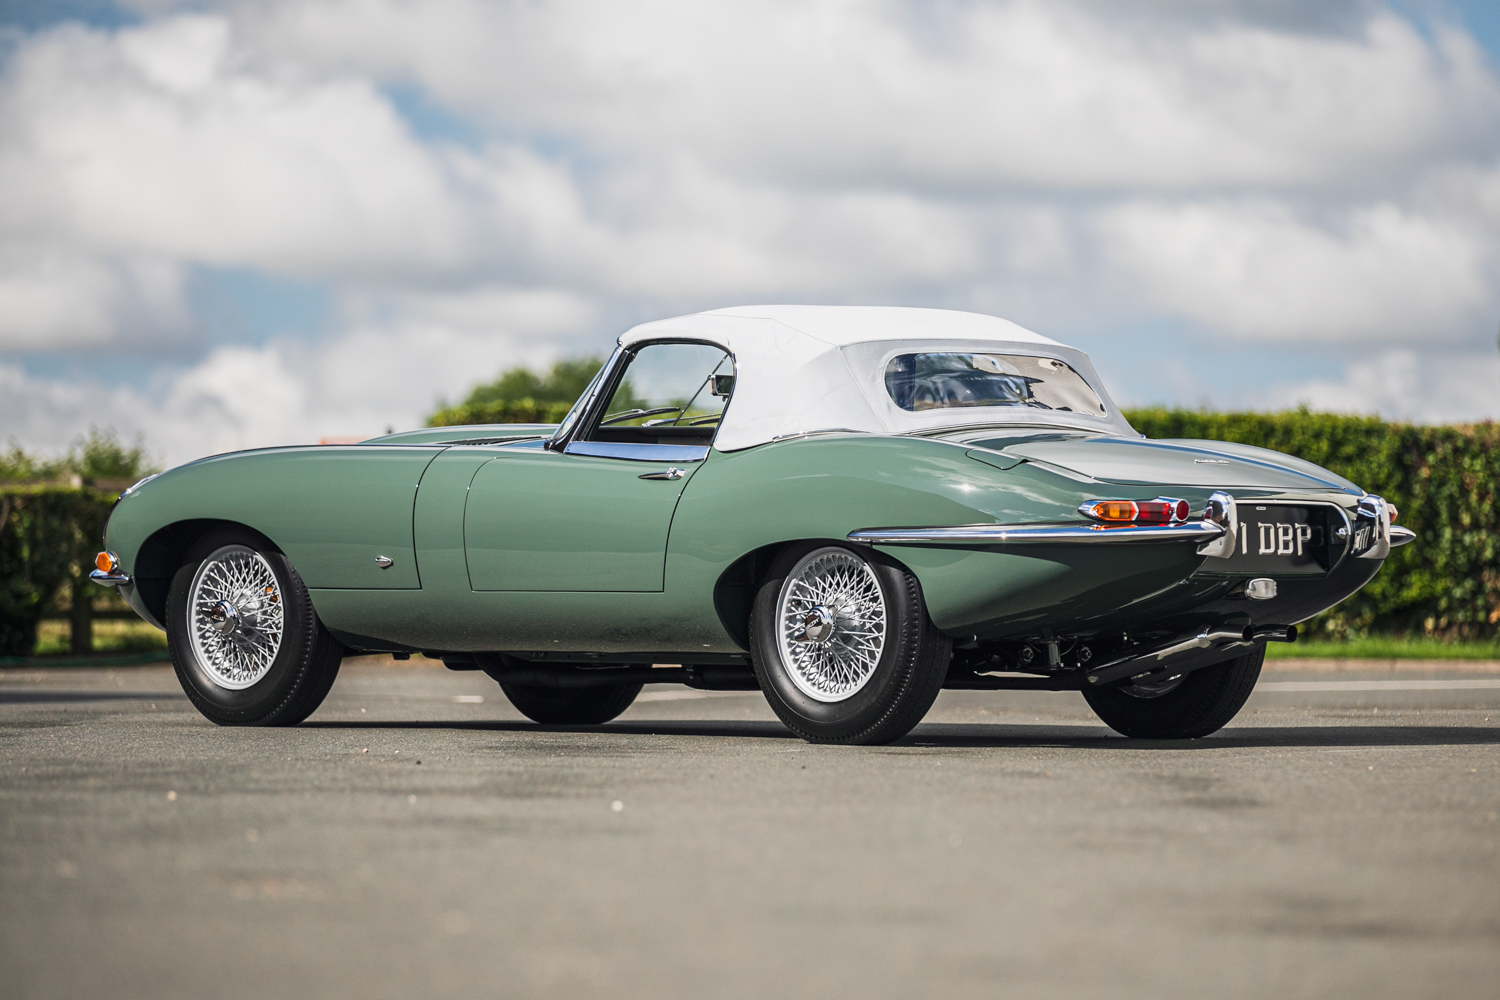 1961 Jaguar E-Type Roadster - Chassis 850062 - Image 5 of 5